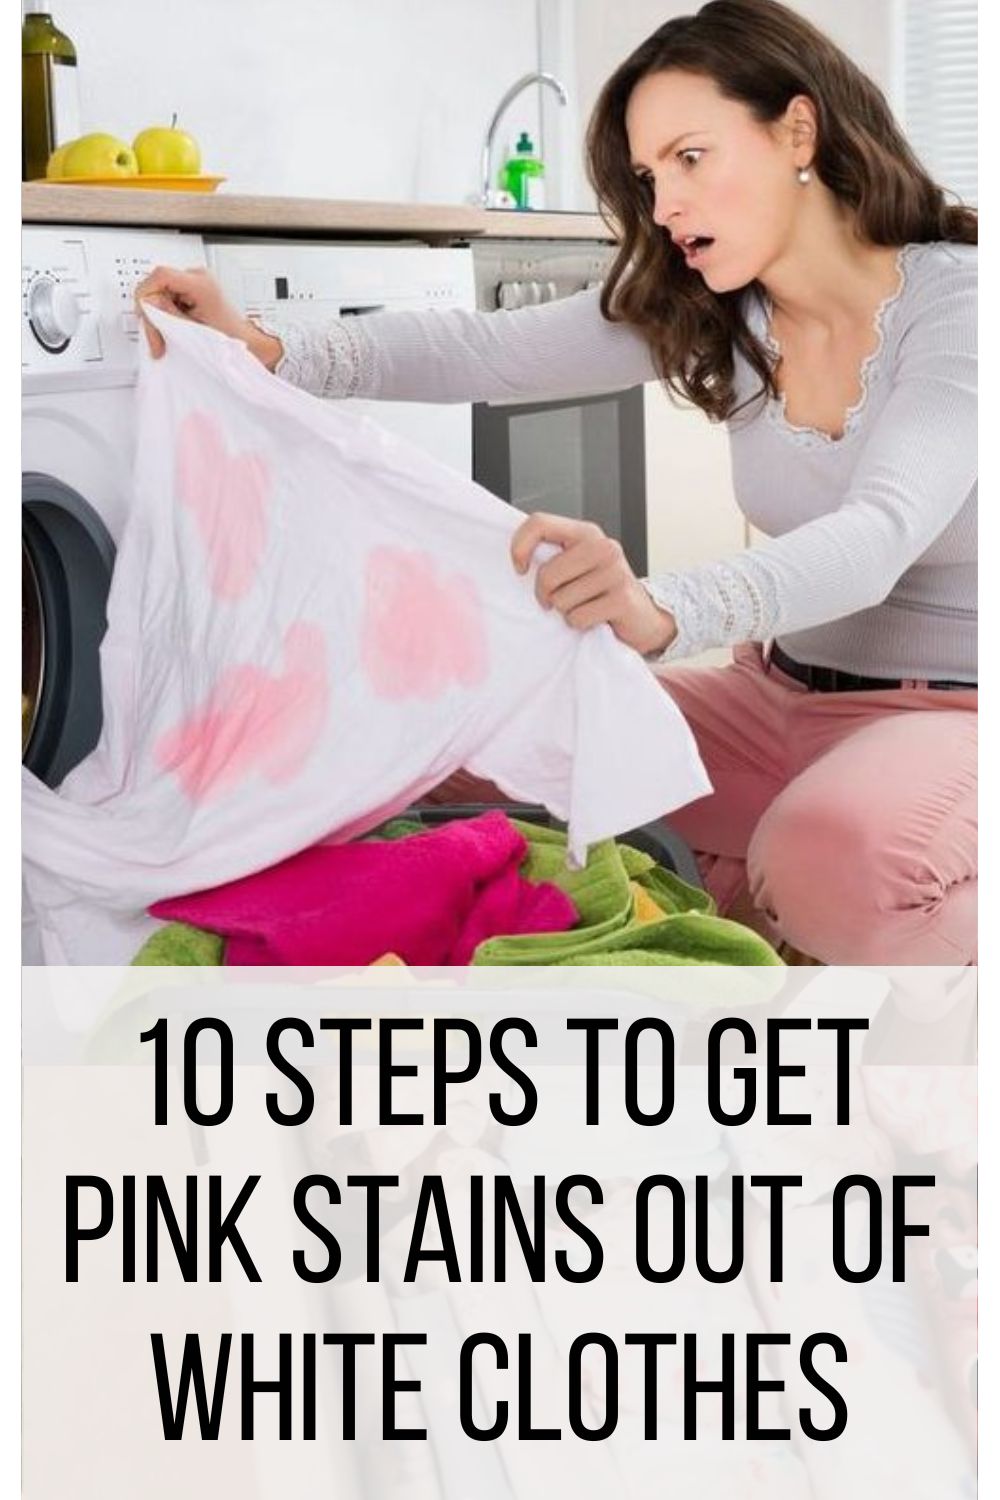 10 Steps to Get Pink Stains Out of White Clothes